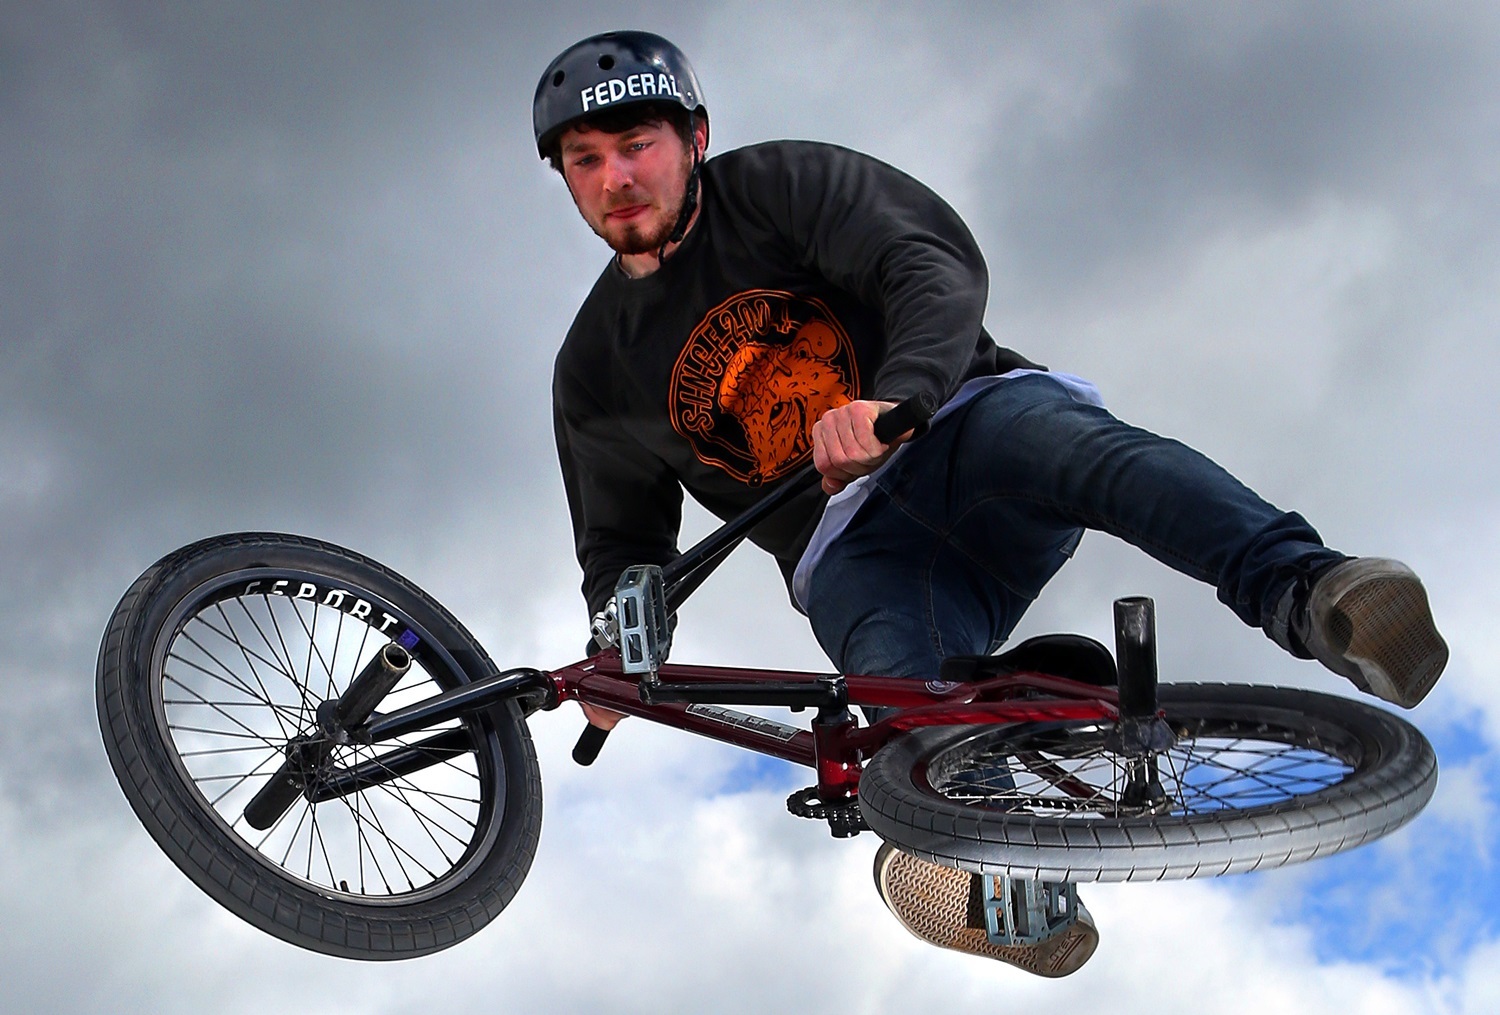 Kris Miller, Courier, 16/05/15. Picture today at the opening of the new Carnoustie skate park which was opened by Provost Helen Oswald. The park was the brain child of five local youths who have worked for years to see their vision realised. Pic shows Shaun Davies doing a tail whip.